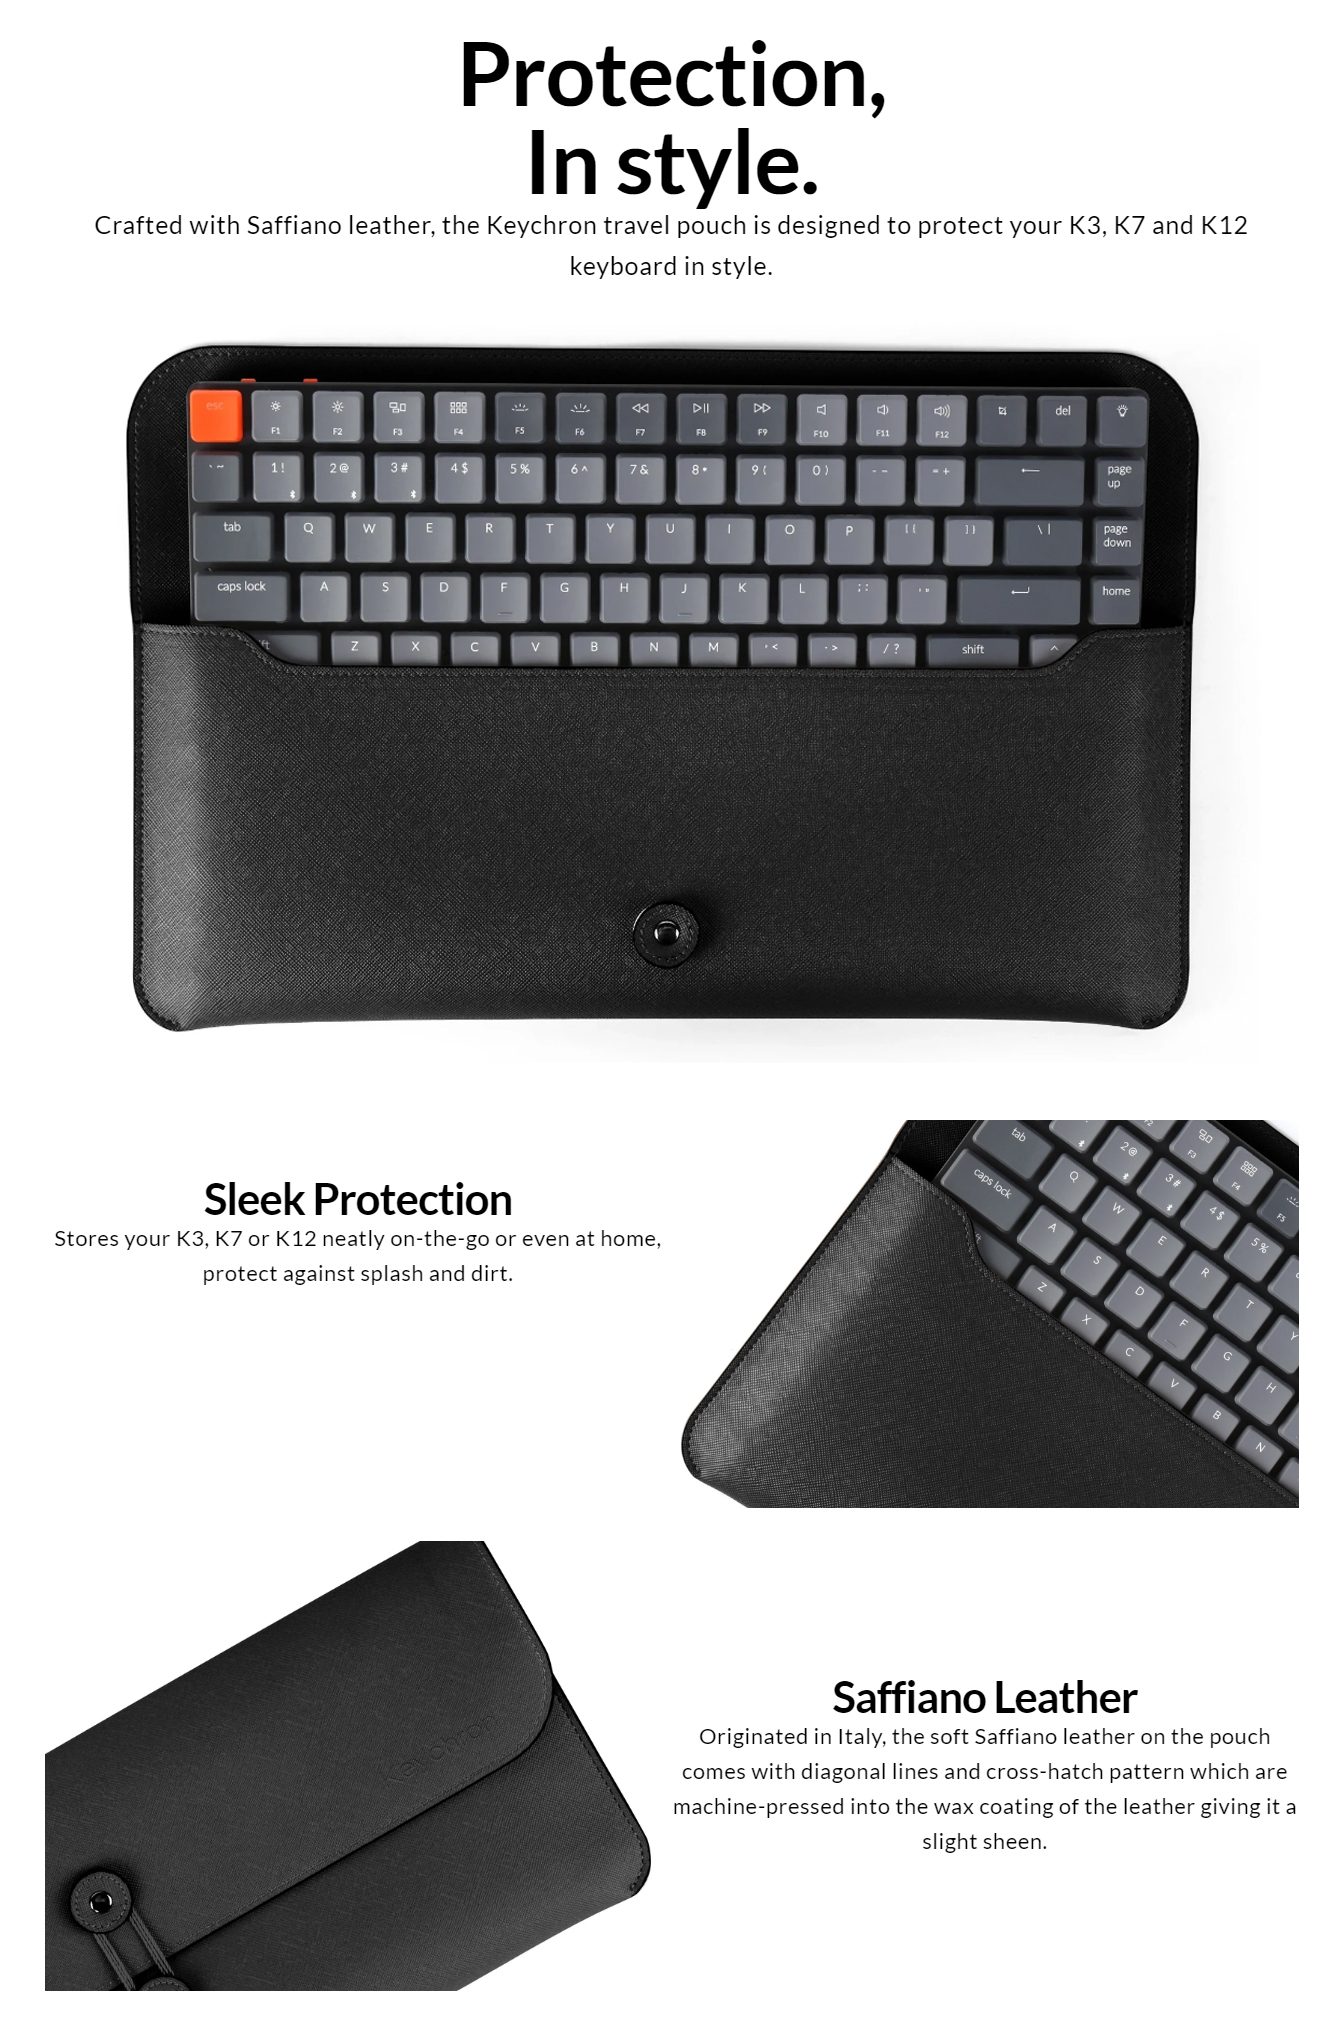 Keyboard-Accessories-Keychron-TP3-G-Travel-Pouch-Keyboard-Carrying-Case-Bag-for-K3-K7-K12-Grey-1